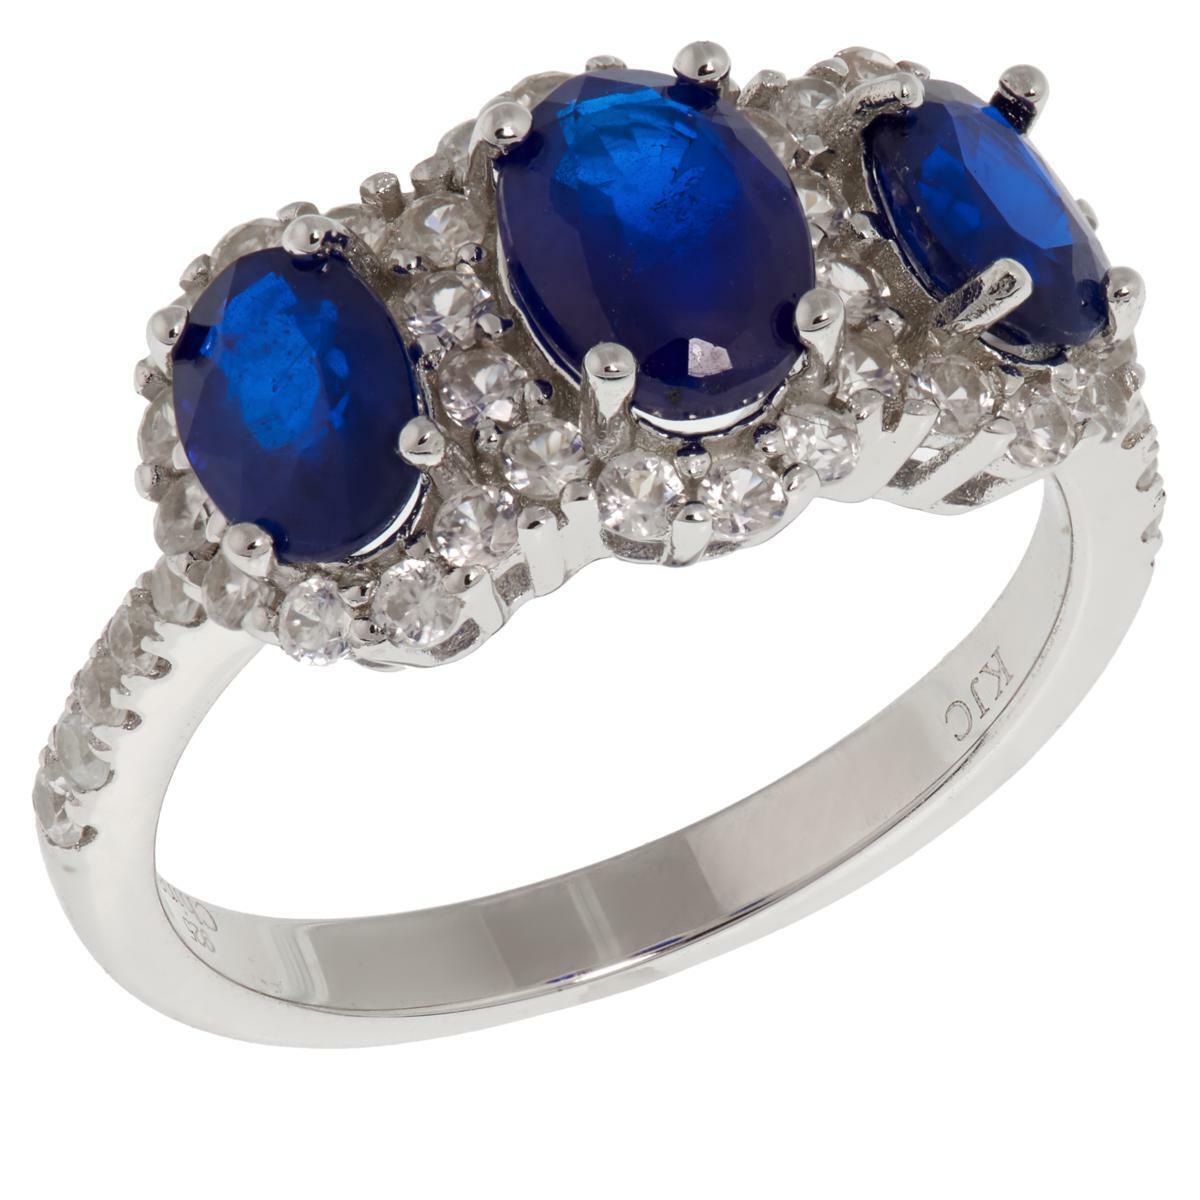 Colleen Lopez 1.53Ctw Blue Spinel & White Zircon 3-Stone Ring Size 5 Hsn $200